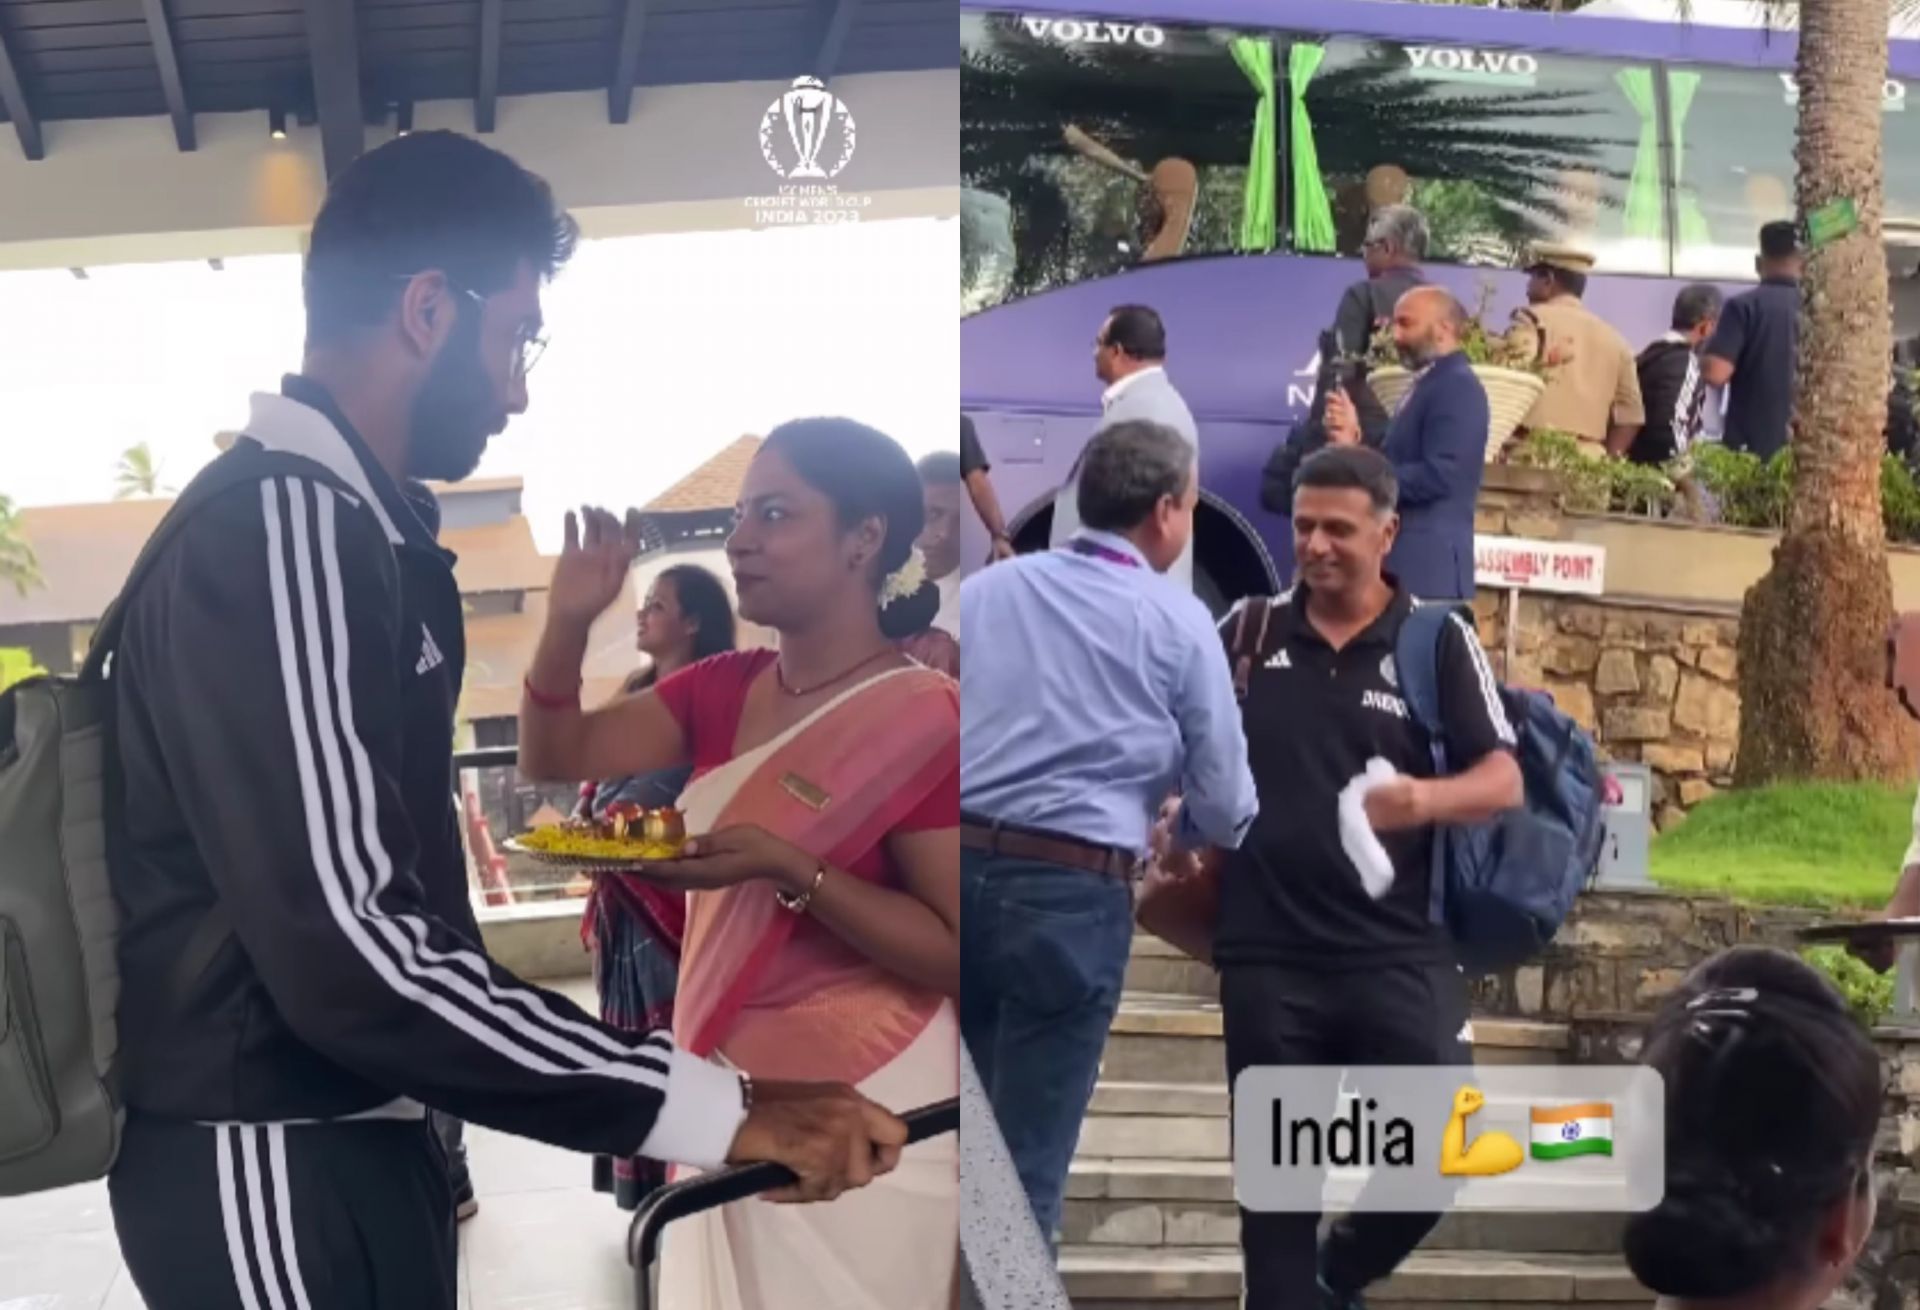 Jasprit Bumrah and Rahul Dravid arrive in Kerala with Team India contingent. 